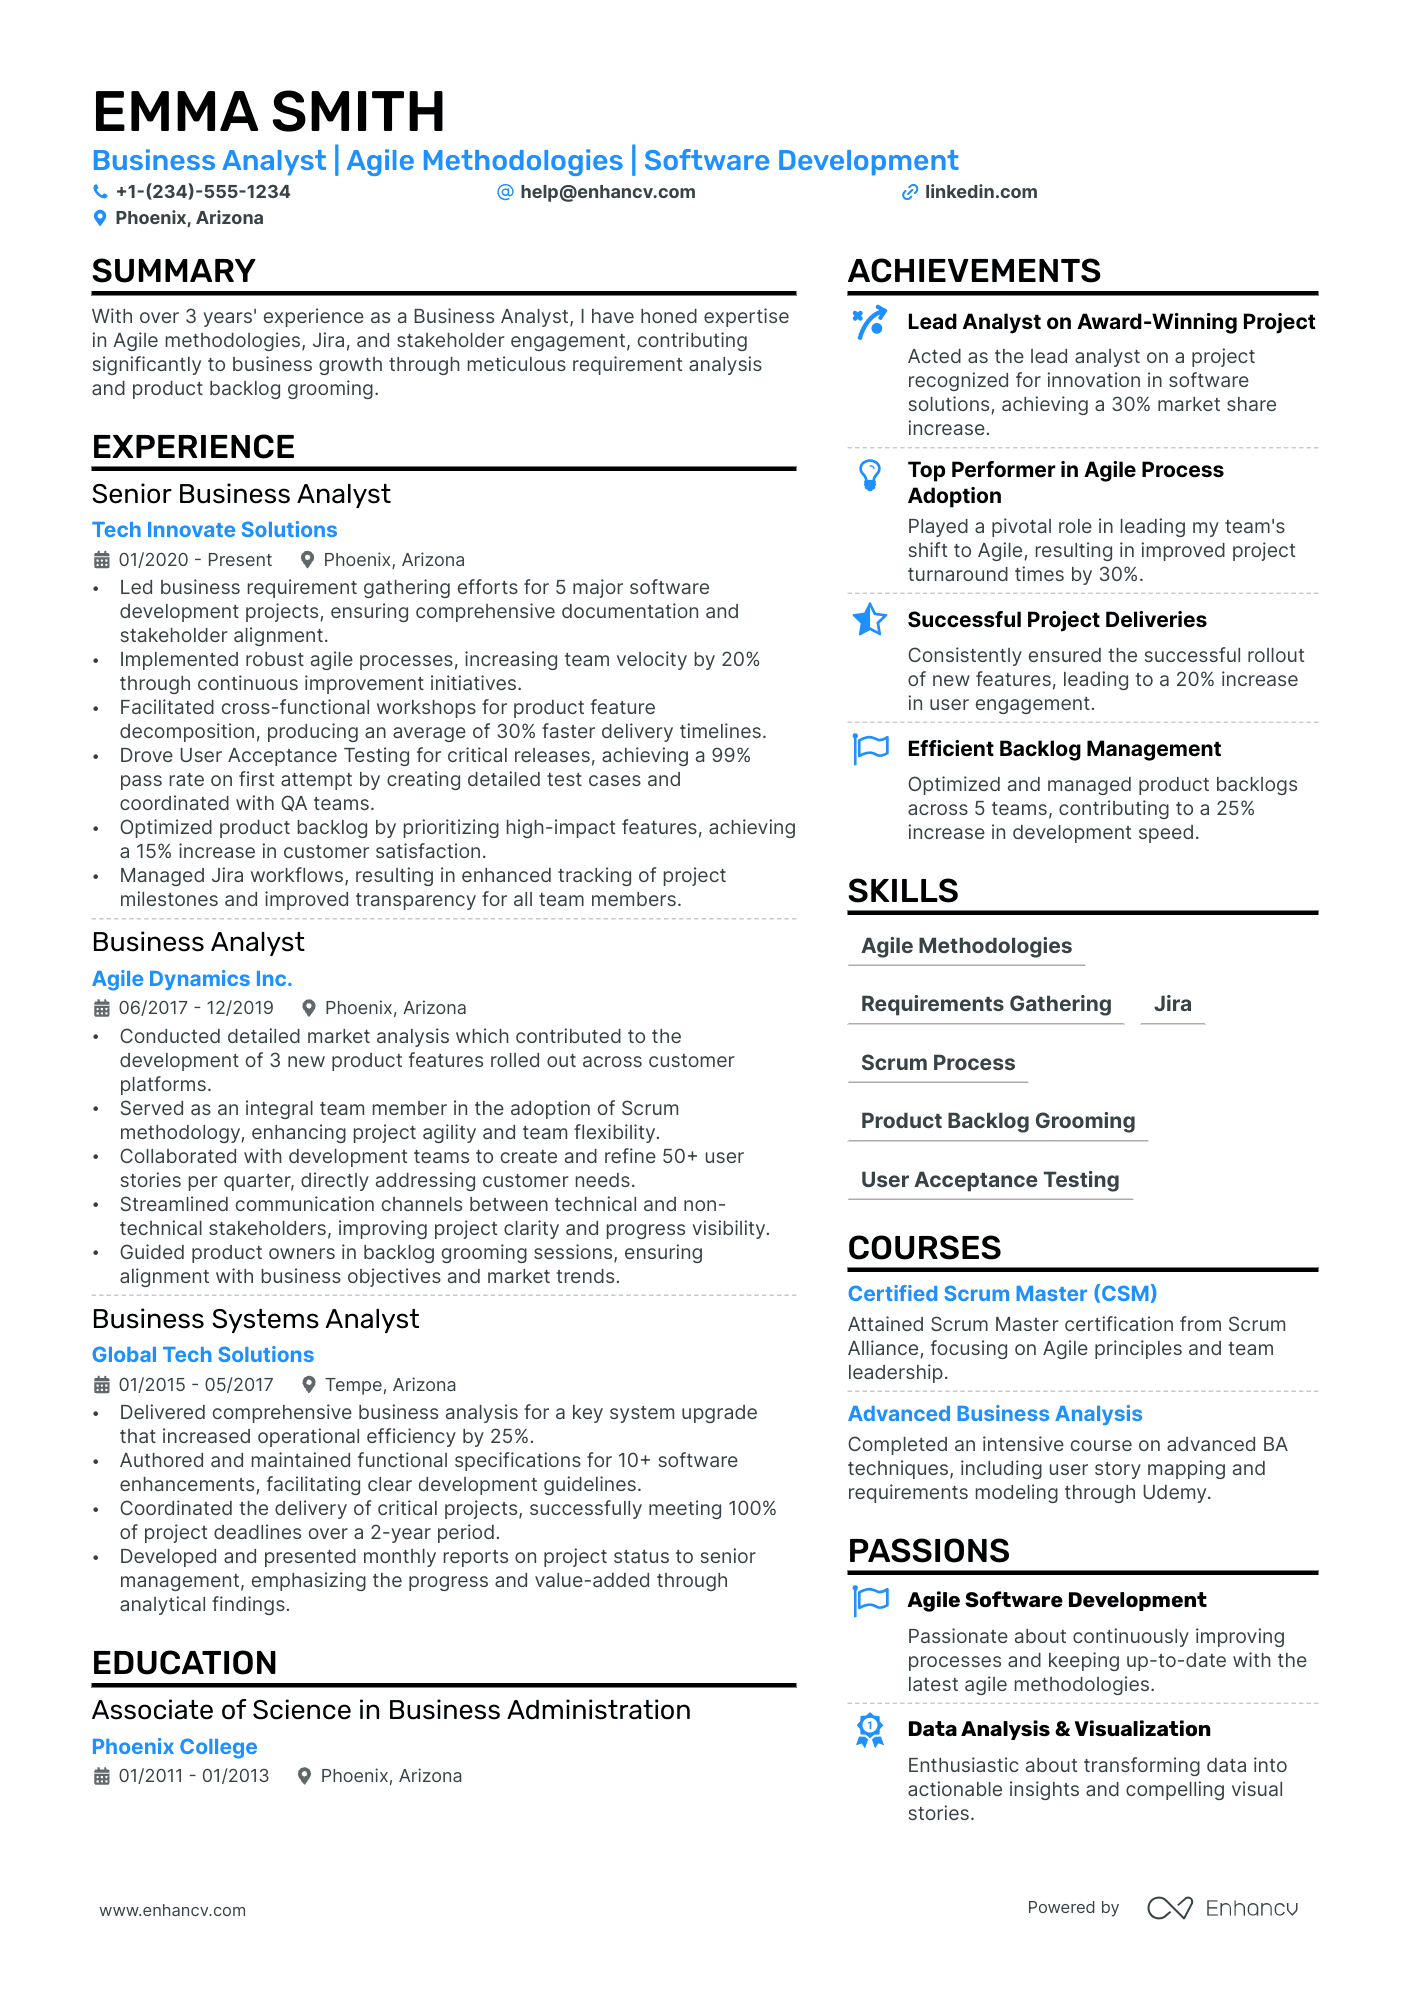 Agile Business Analyst resume example